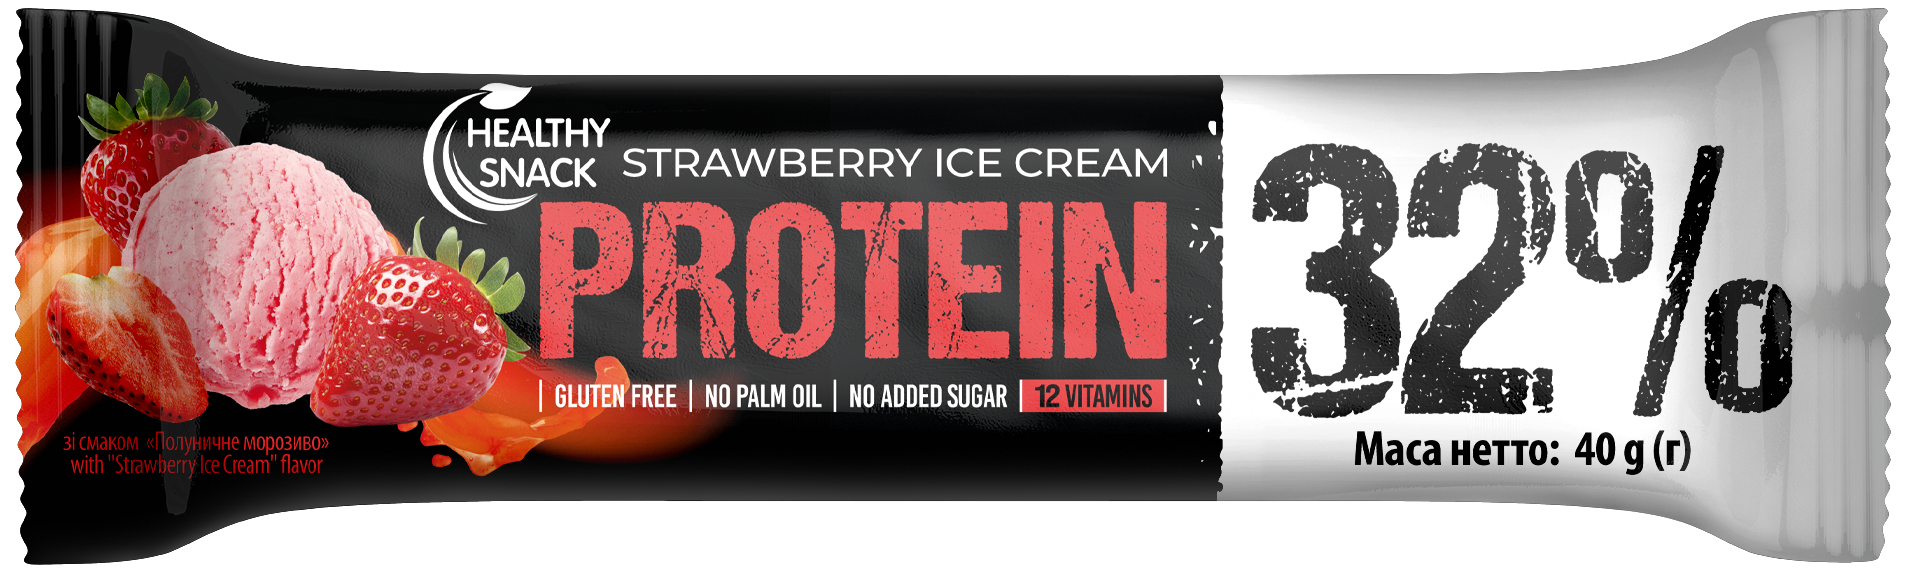 Protein bar for sports nutrition with 